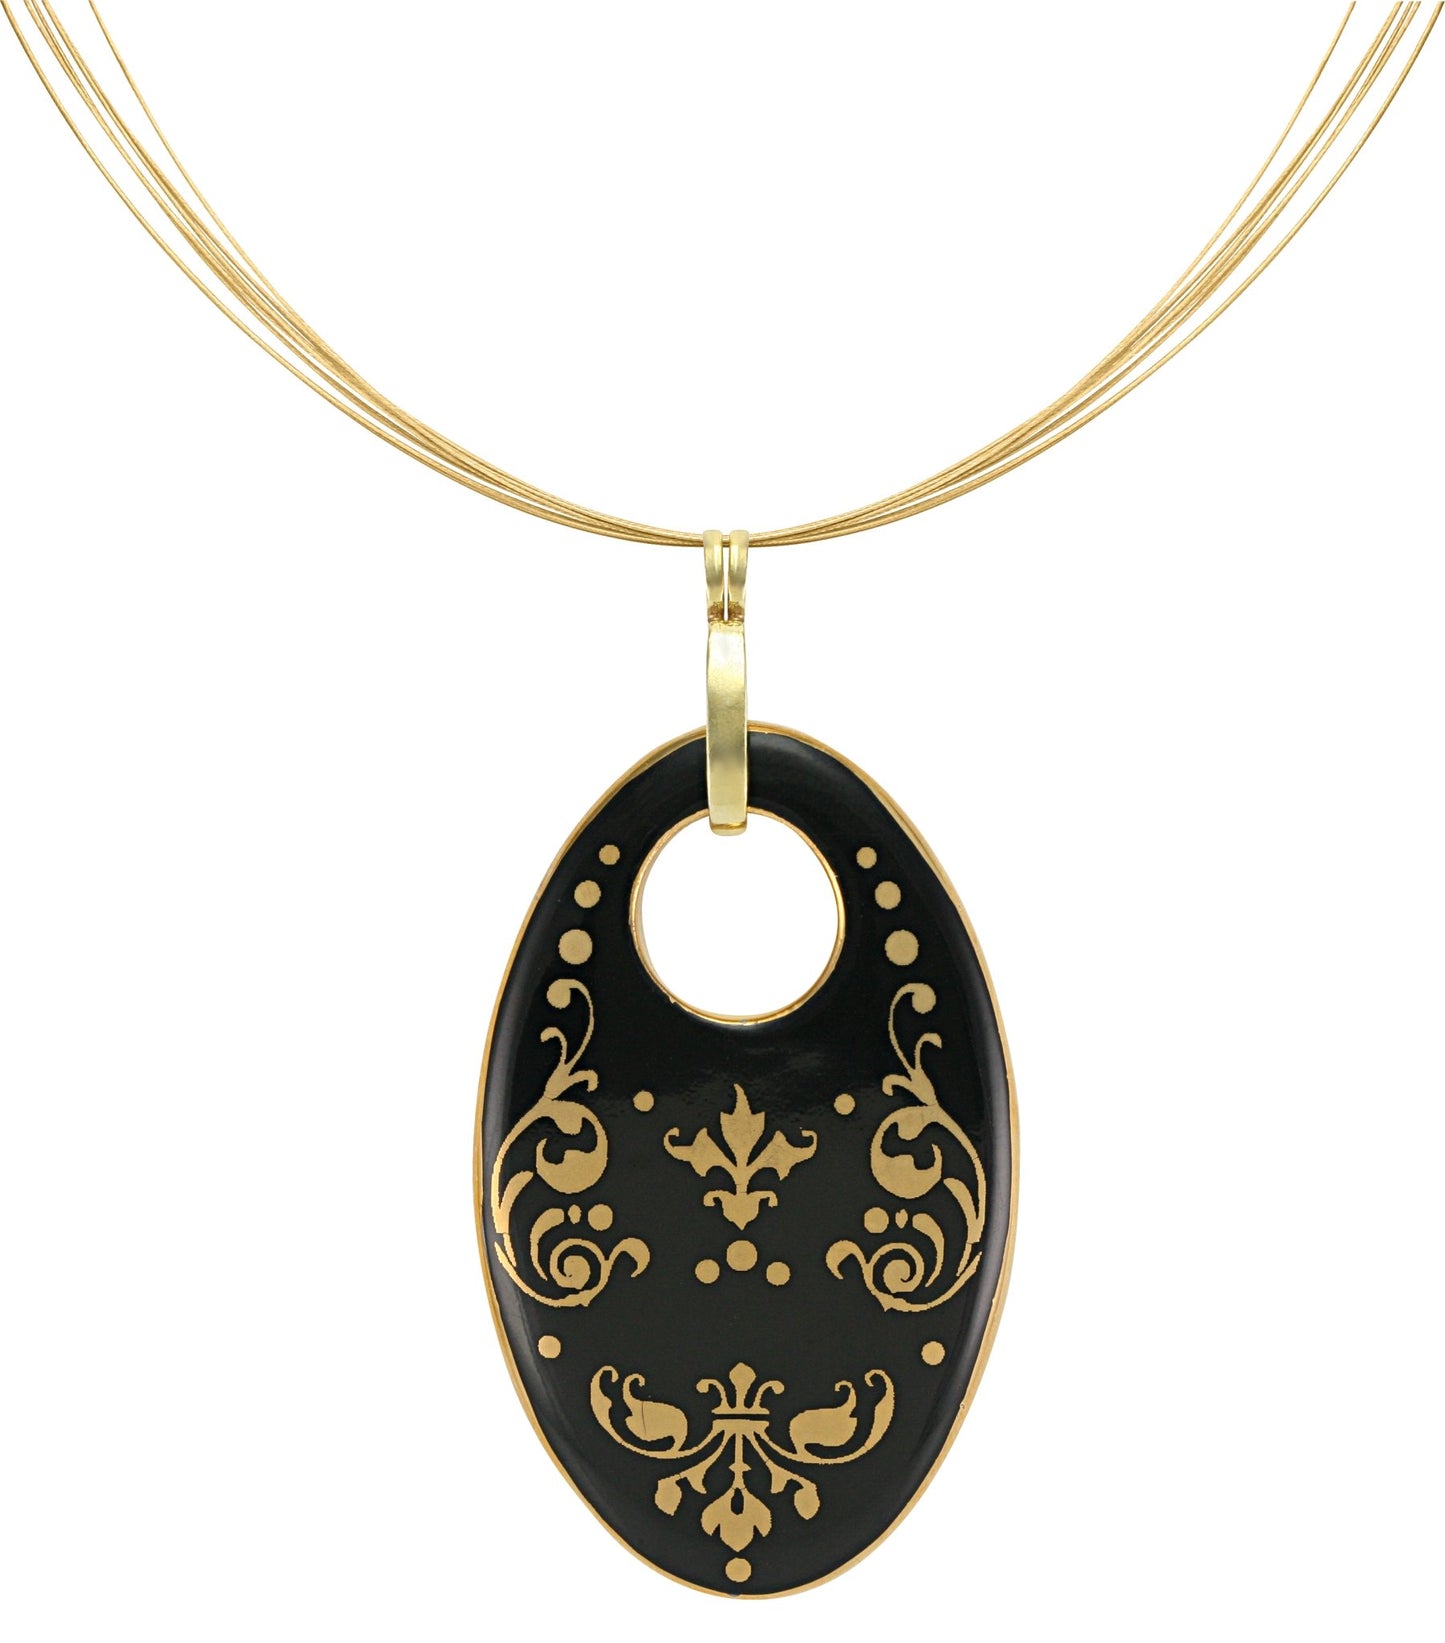 baroque black 21 k gold plated oval hand painted fine porcelain pendant 62 x 40 mm